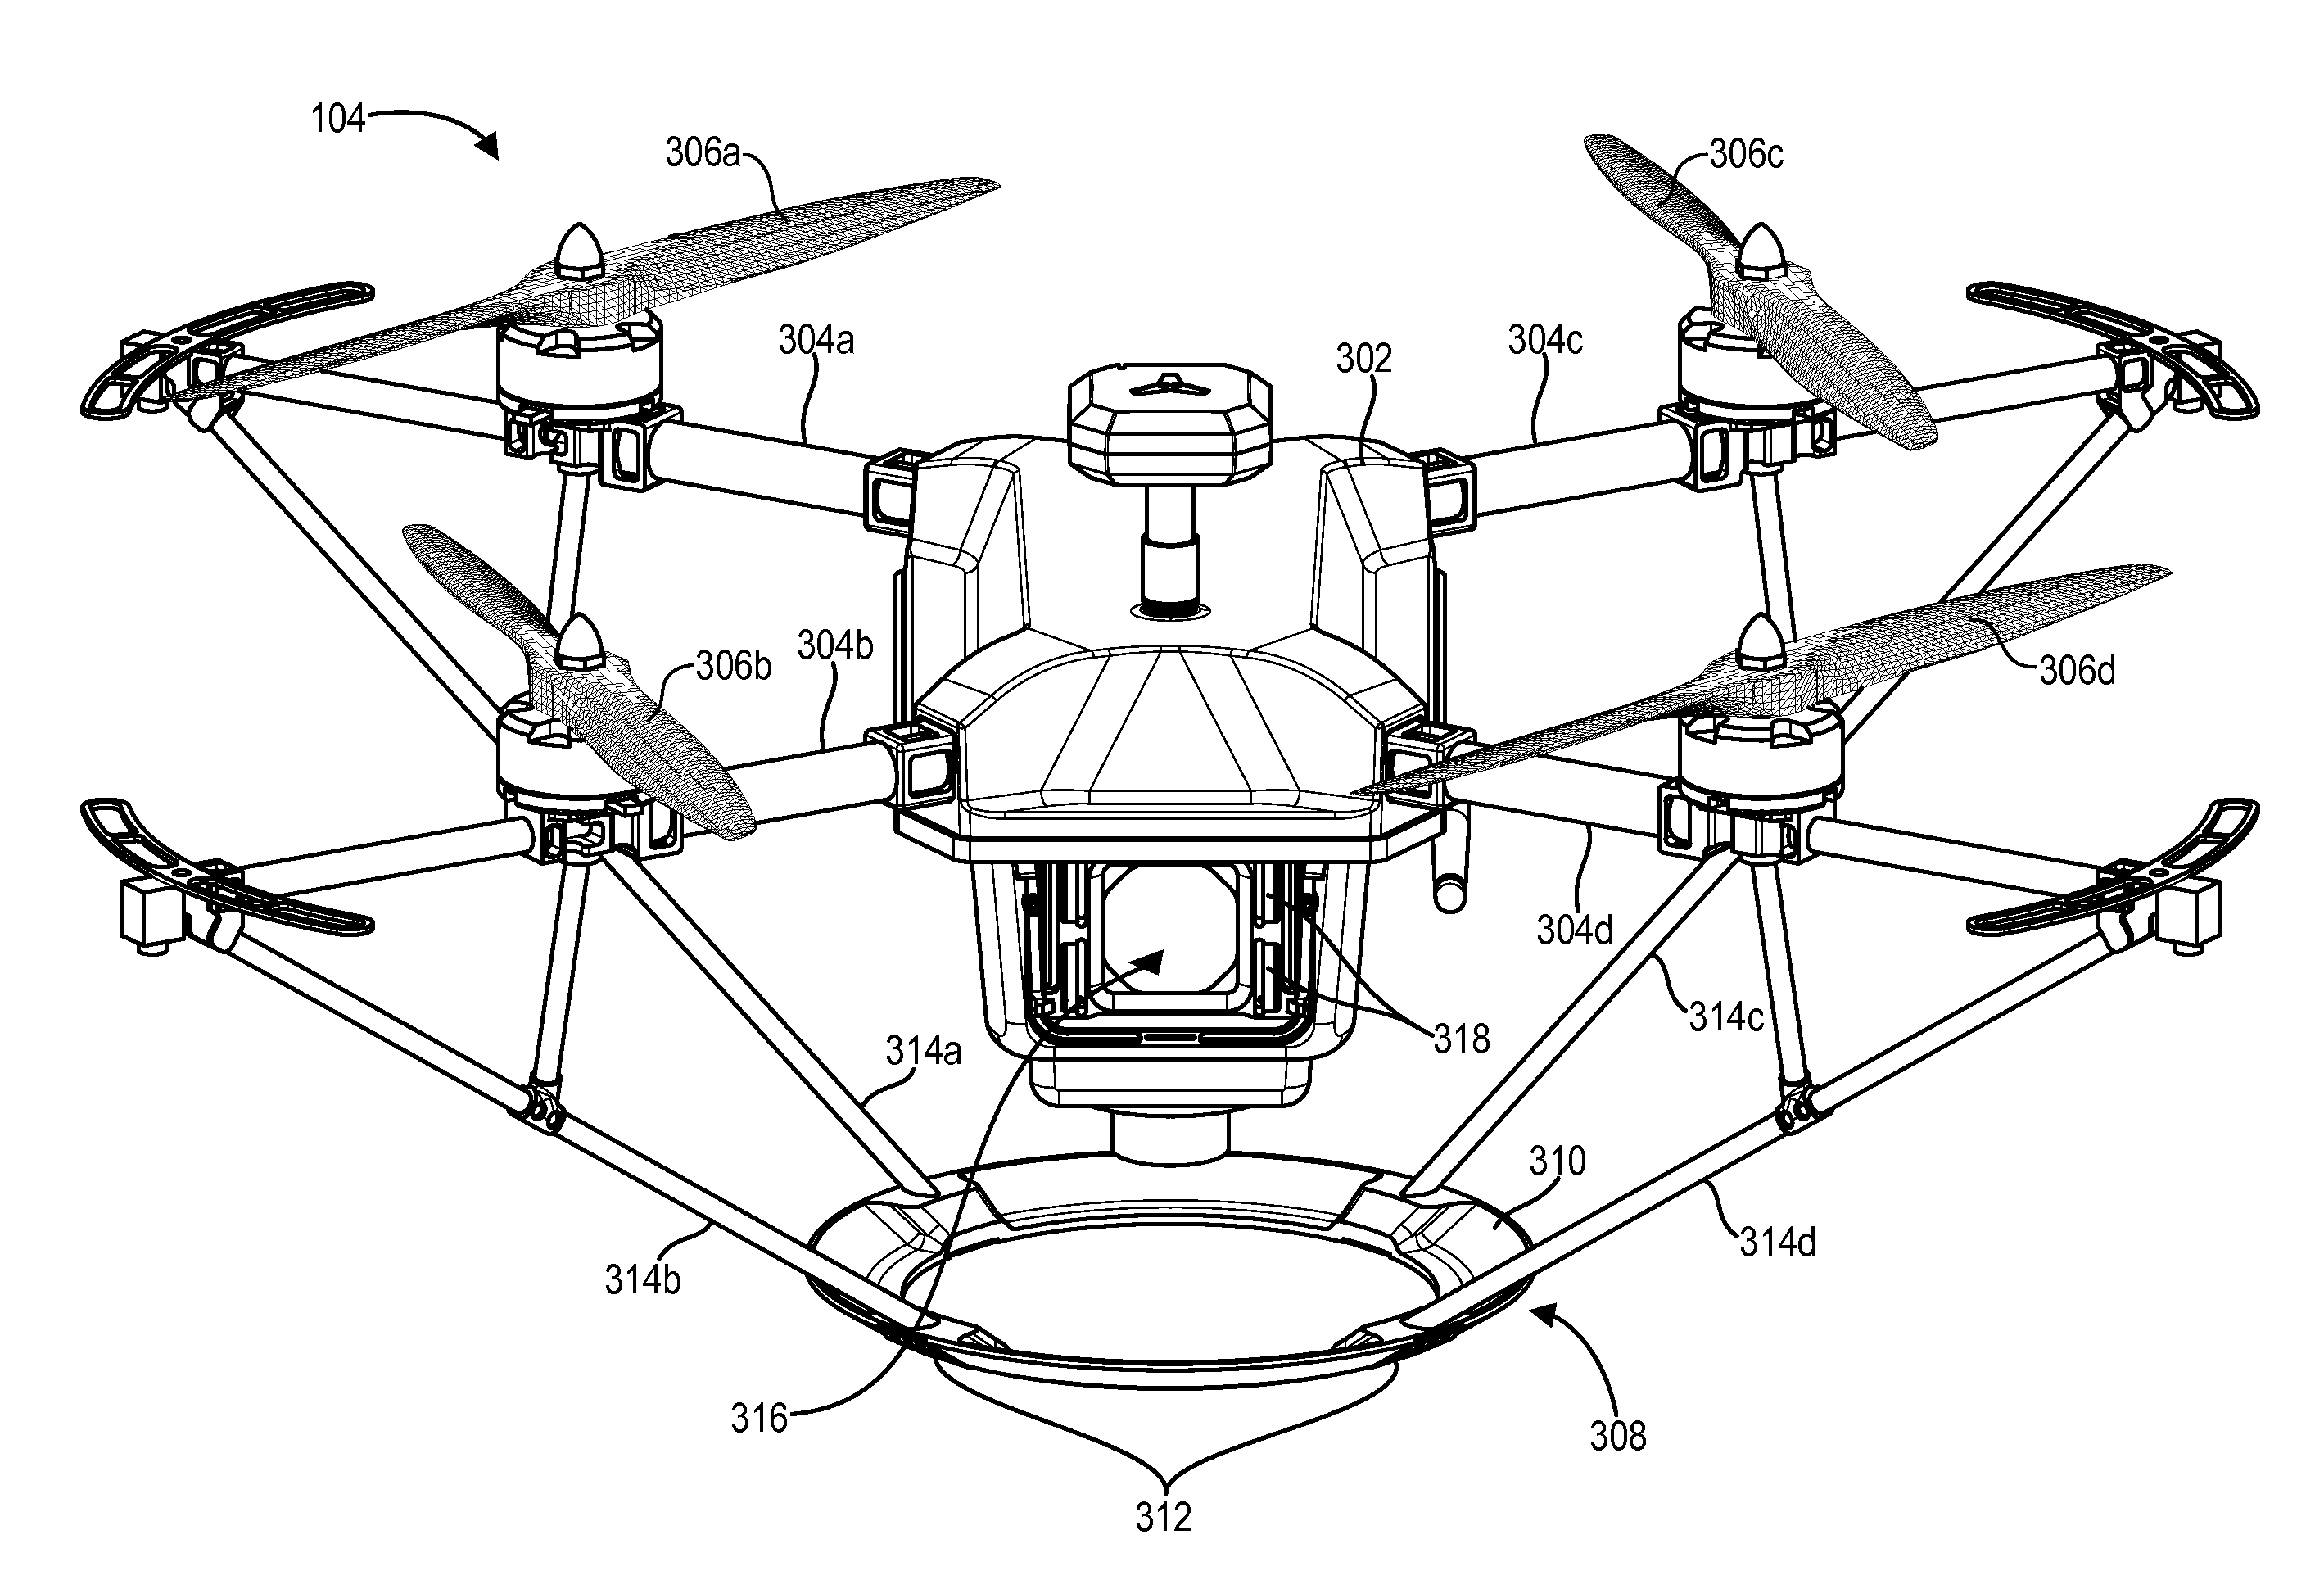 Unmanned aerial vehicle landing interface